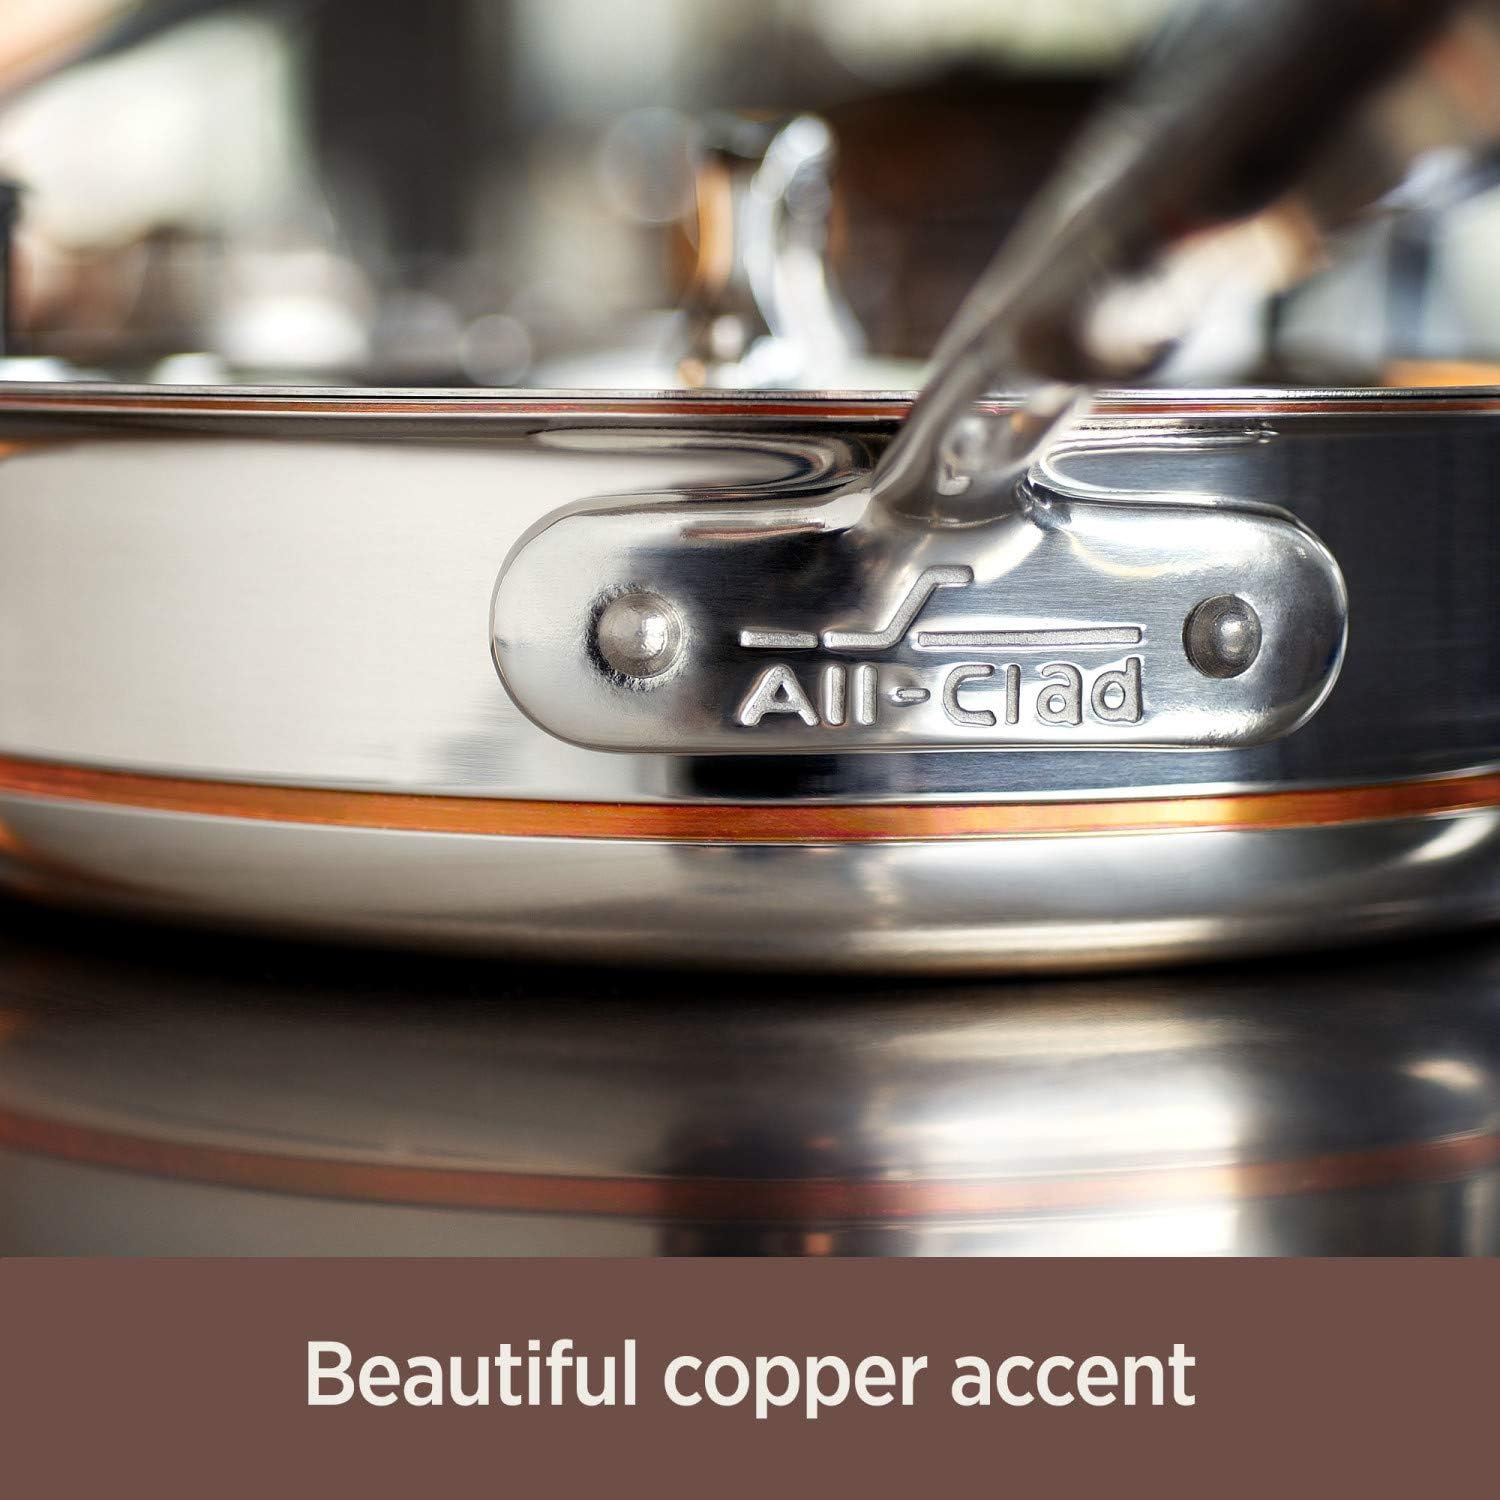 https://bigbigmart.com/wp-content/uploads/2023/08/All-Clad-Copper-Core-5-Ply-Stainless-Steel-Saucepan-with-Lid-3-Quart-Induction-Oven-Broil-Safe-600F-Pots-and-Pans-Cookware8.jpg